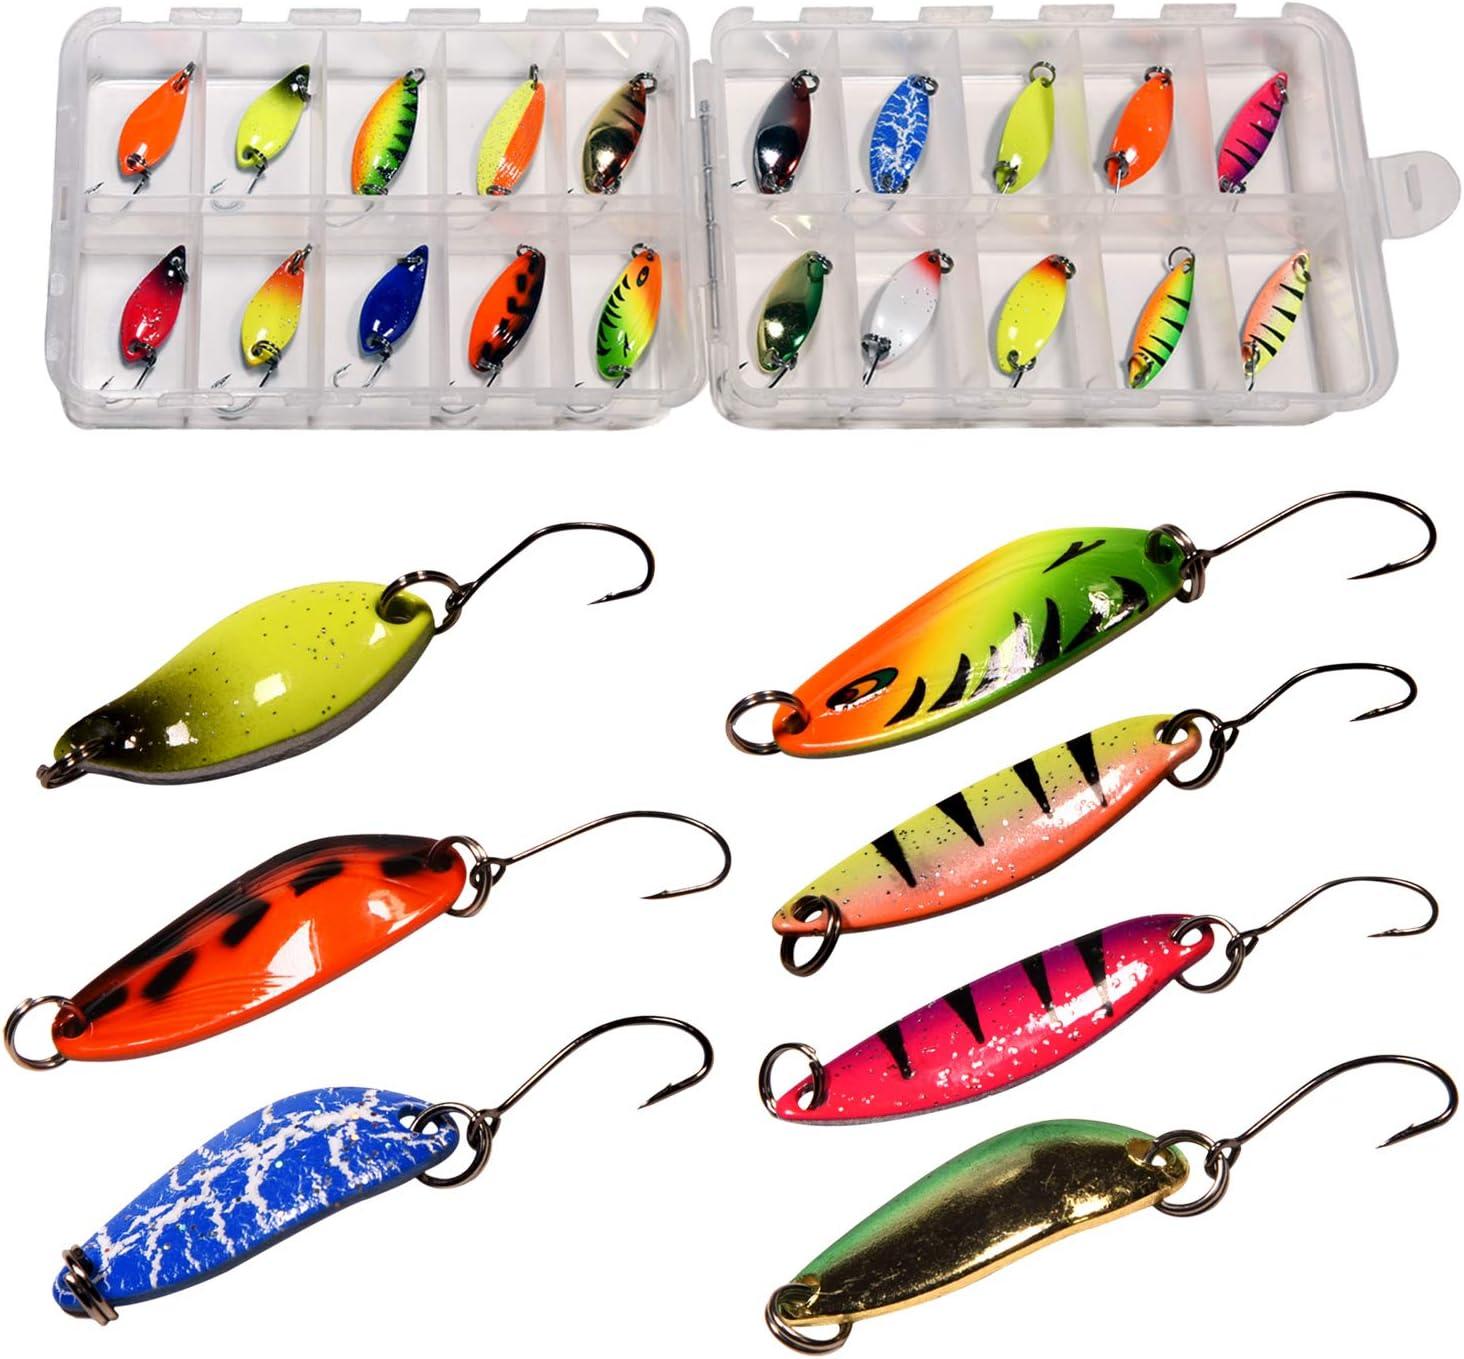 THKFISH Spoon Fishing Lures for Trout Spoons Hard Baits Single Hook Trout Lures  Metal Fishing Lures for Char Perch 12Pcs/20Pcs/15Pcs